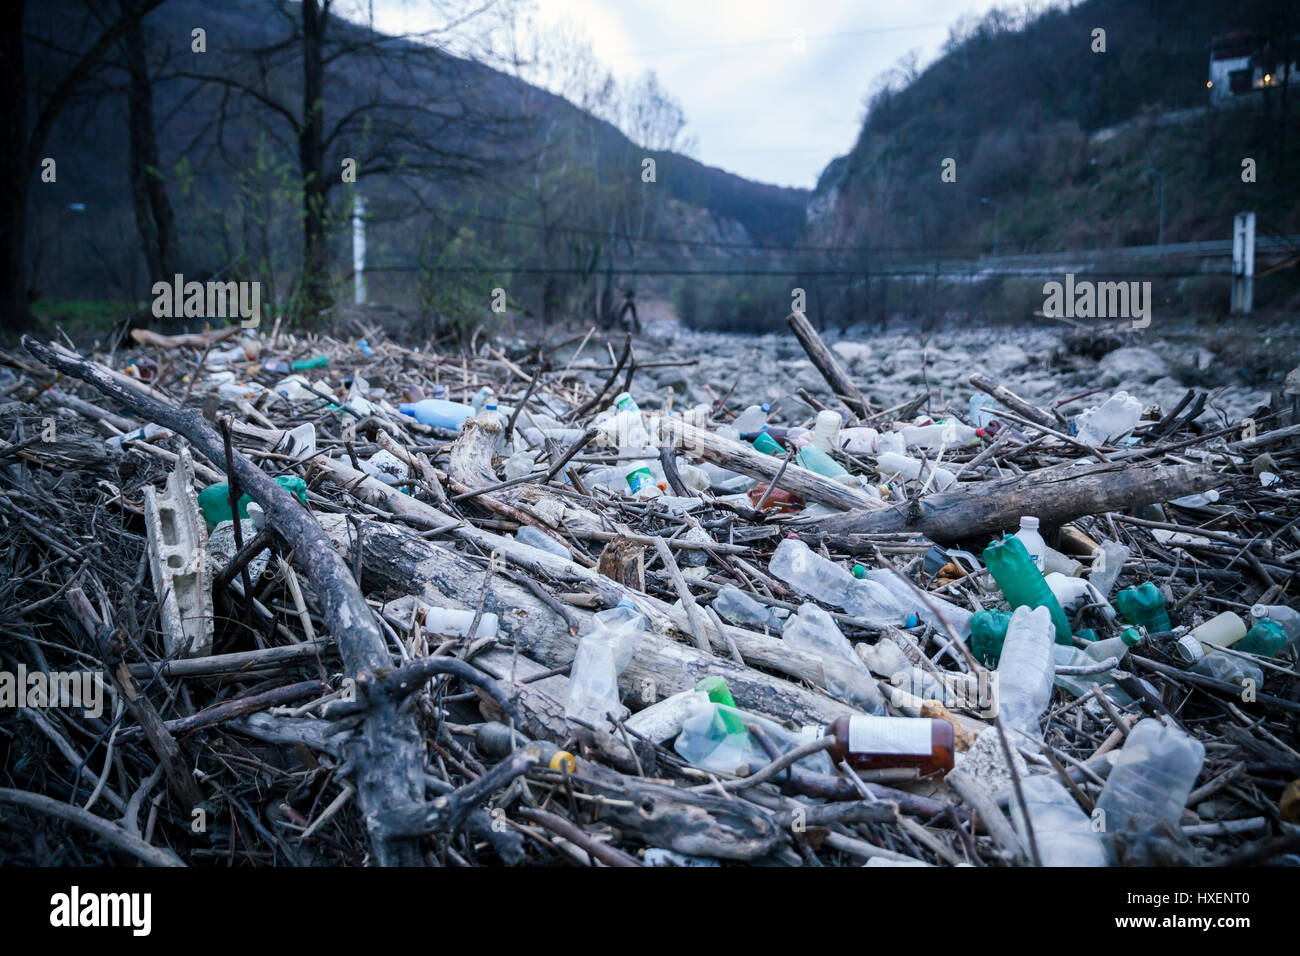 pollution of plastic bottles in the river bed Stock Photo